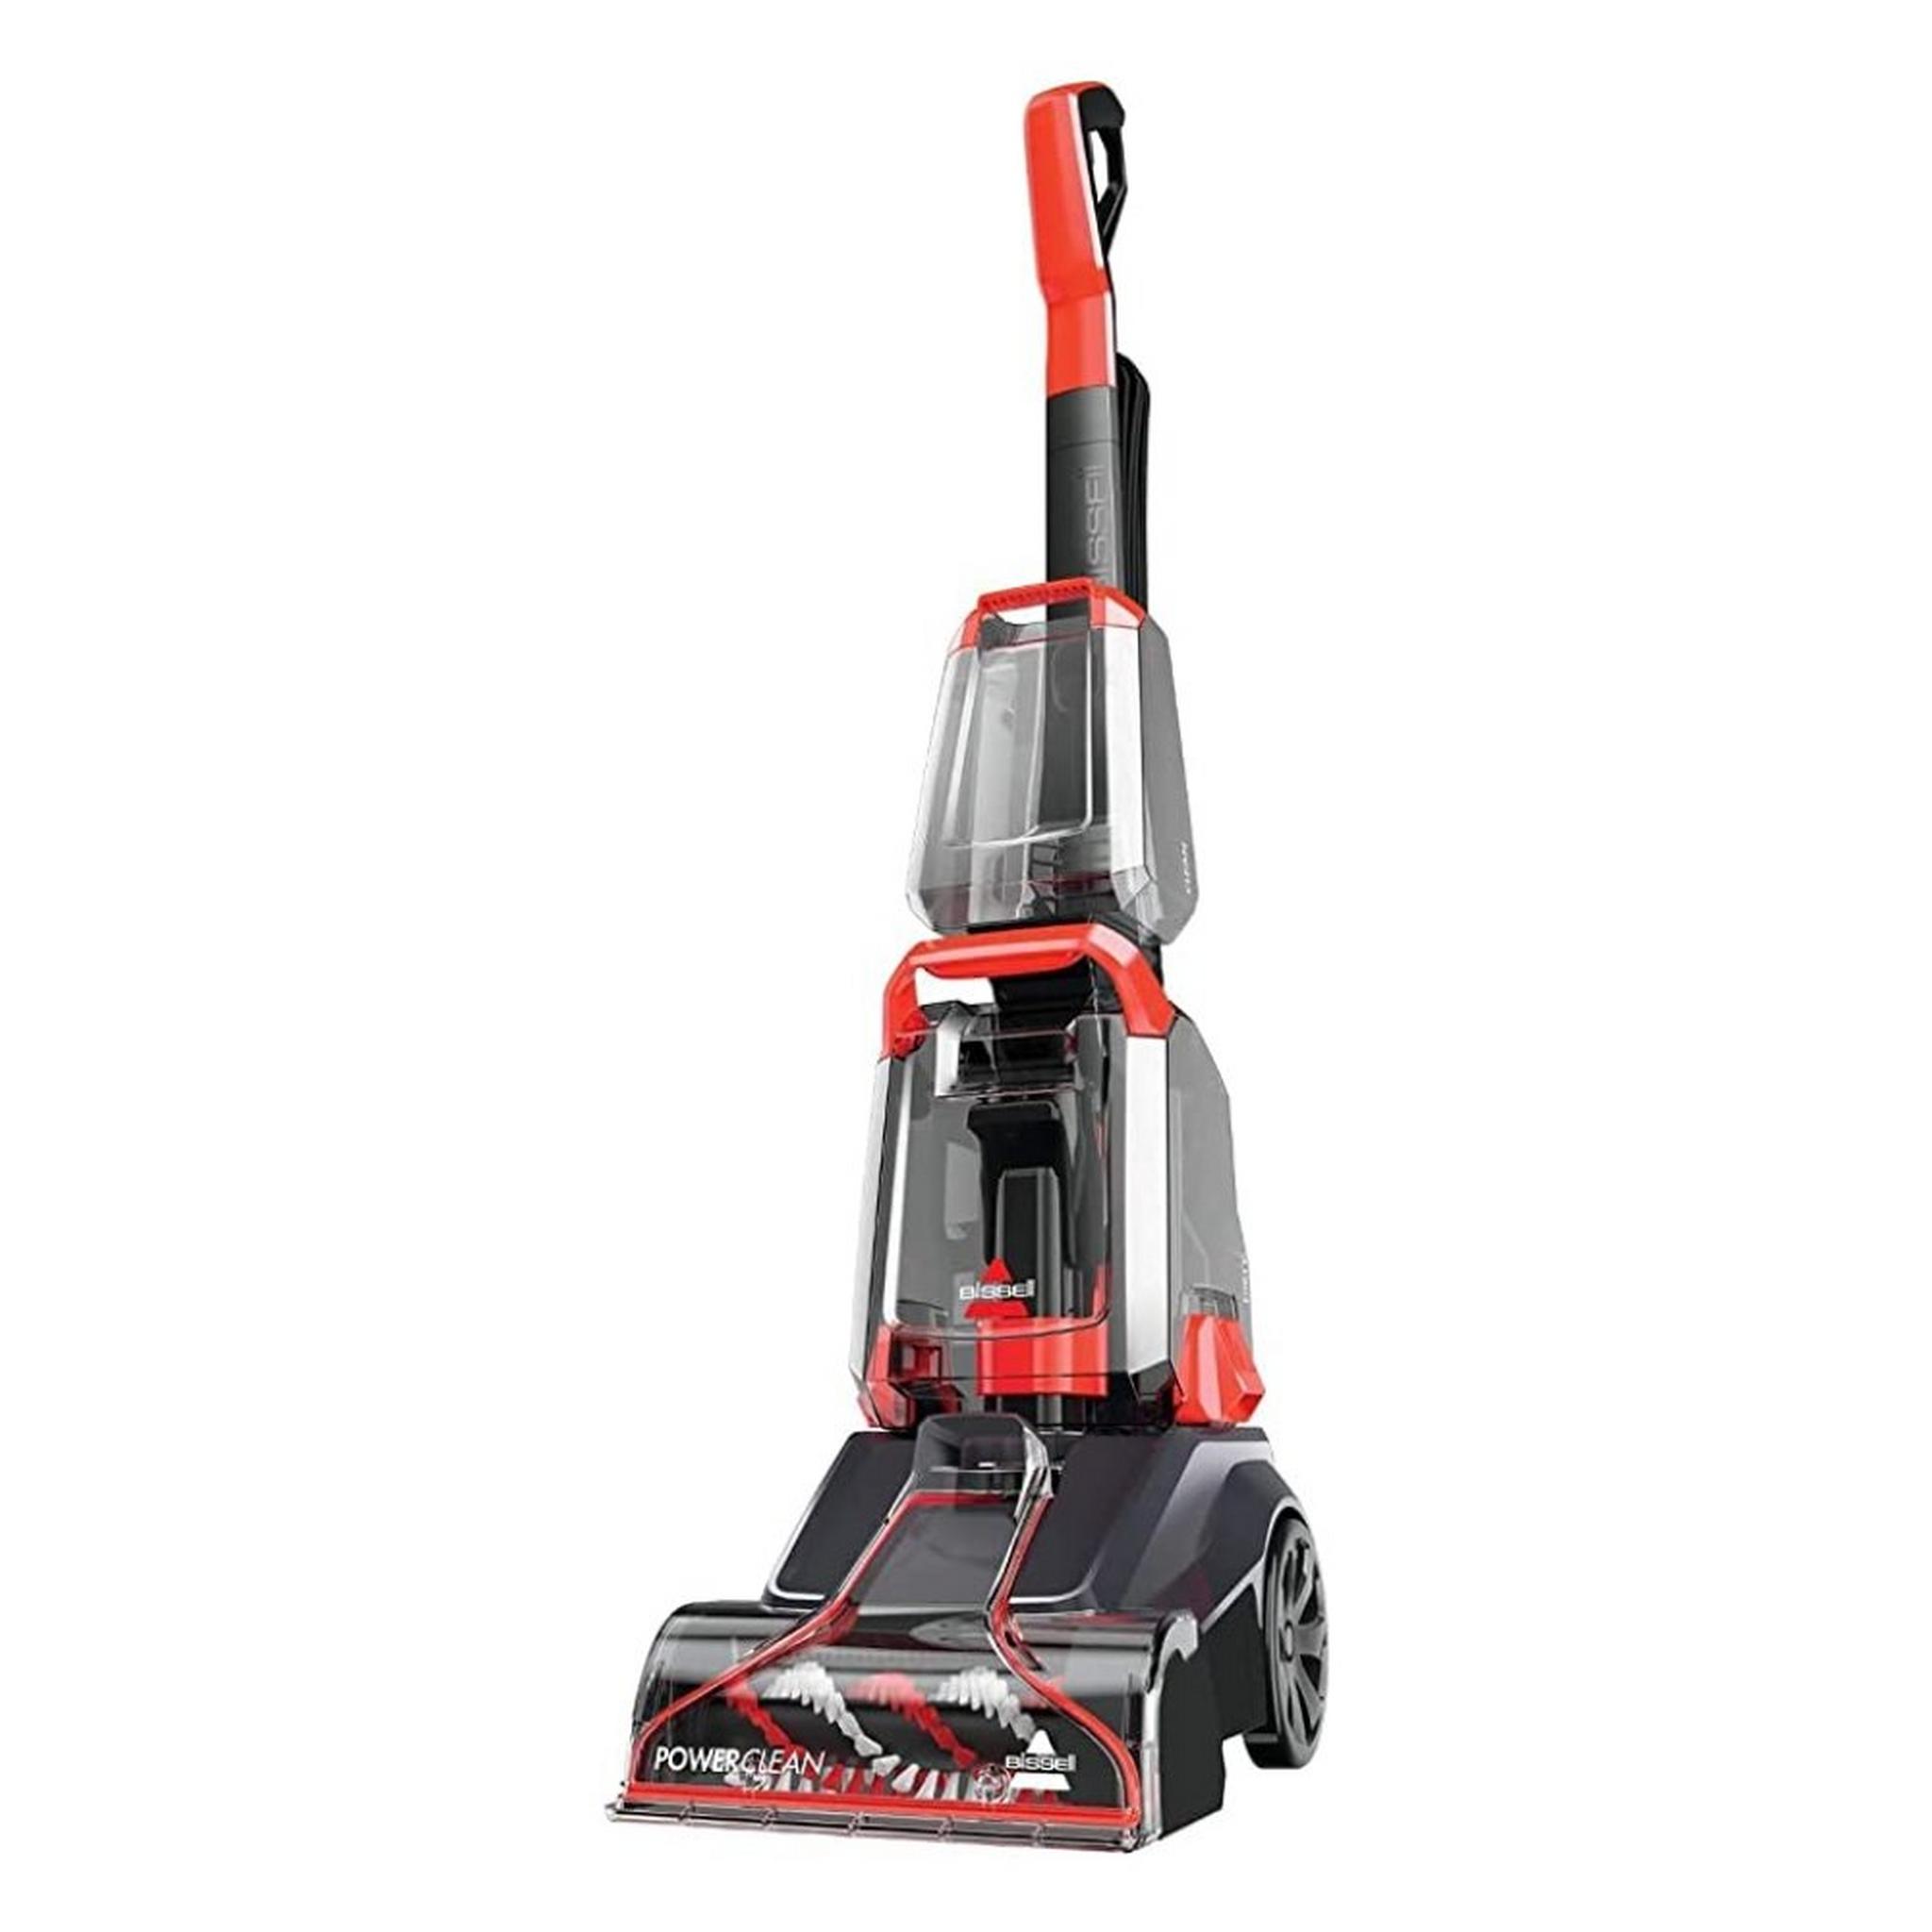 Bissell 2889K | Turbo Clean PowerBrush Upright Deep Carpet Cleaner